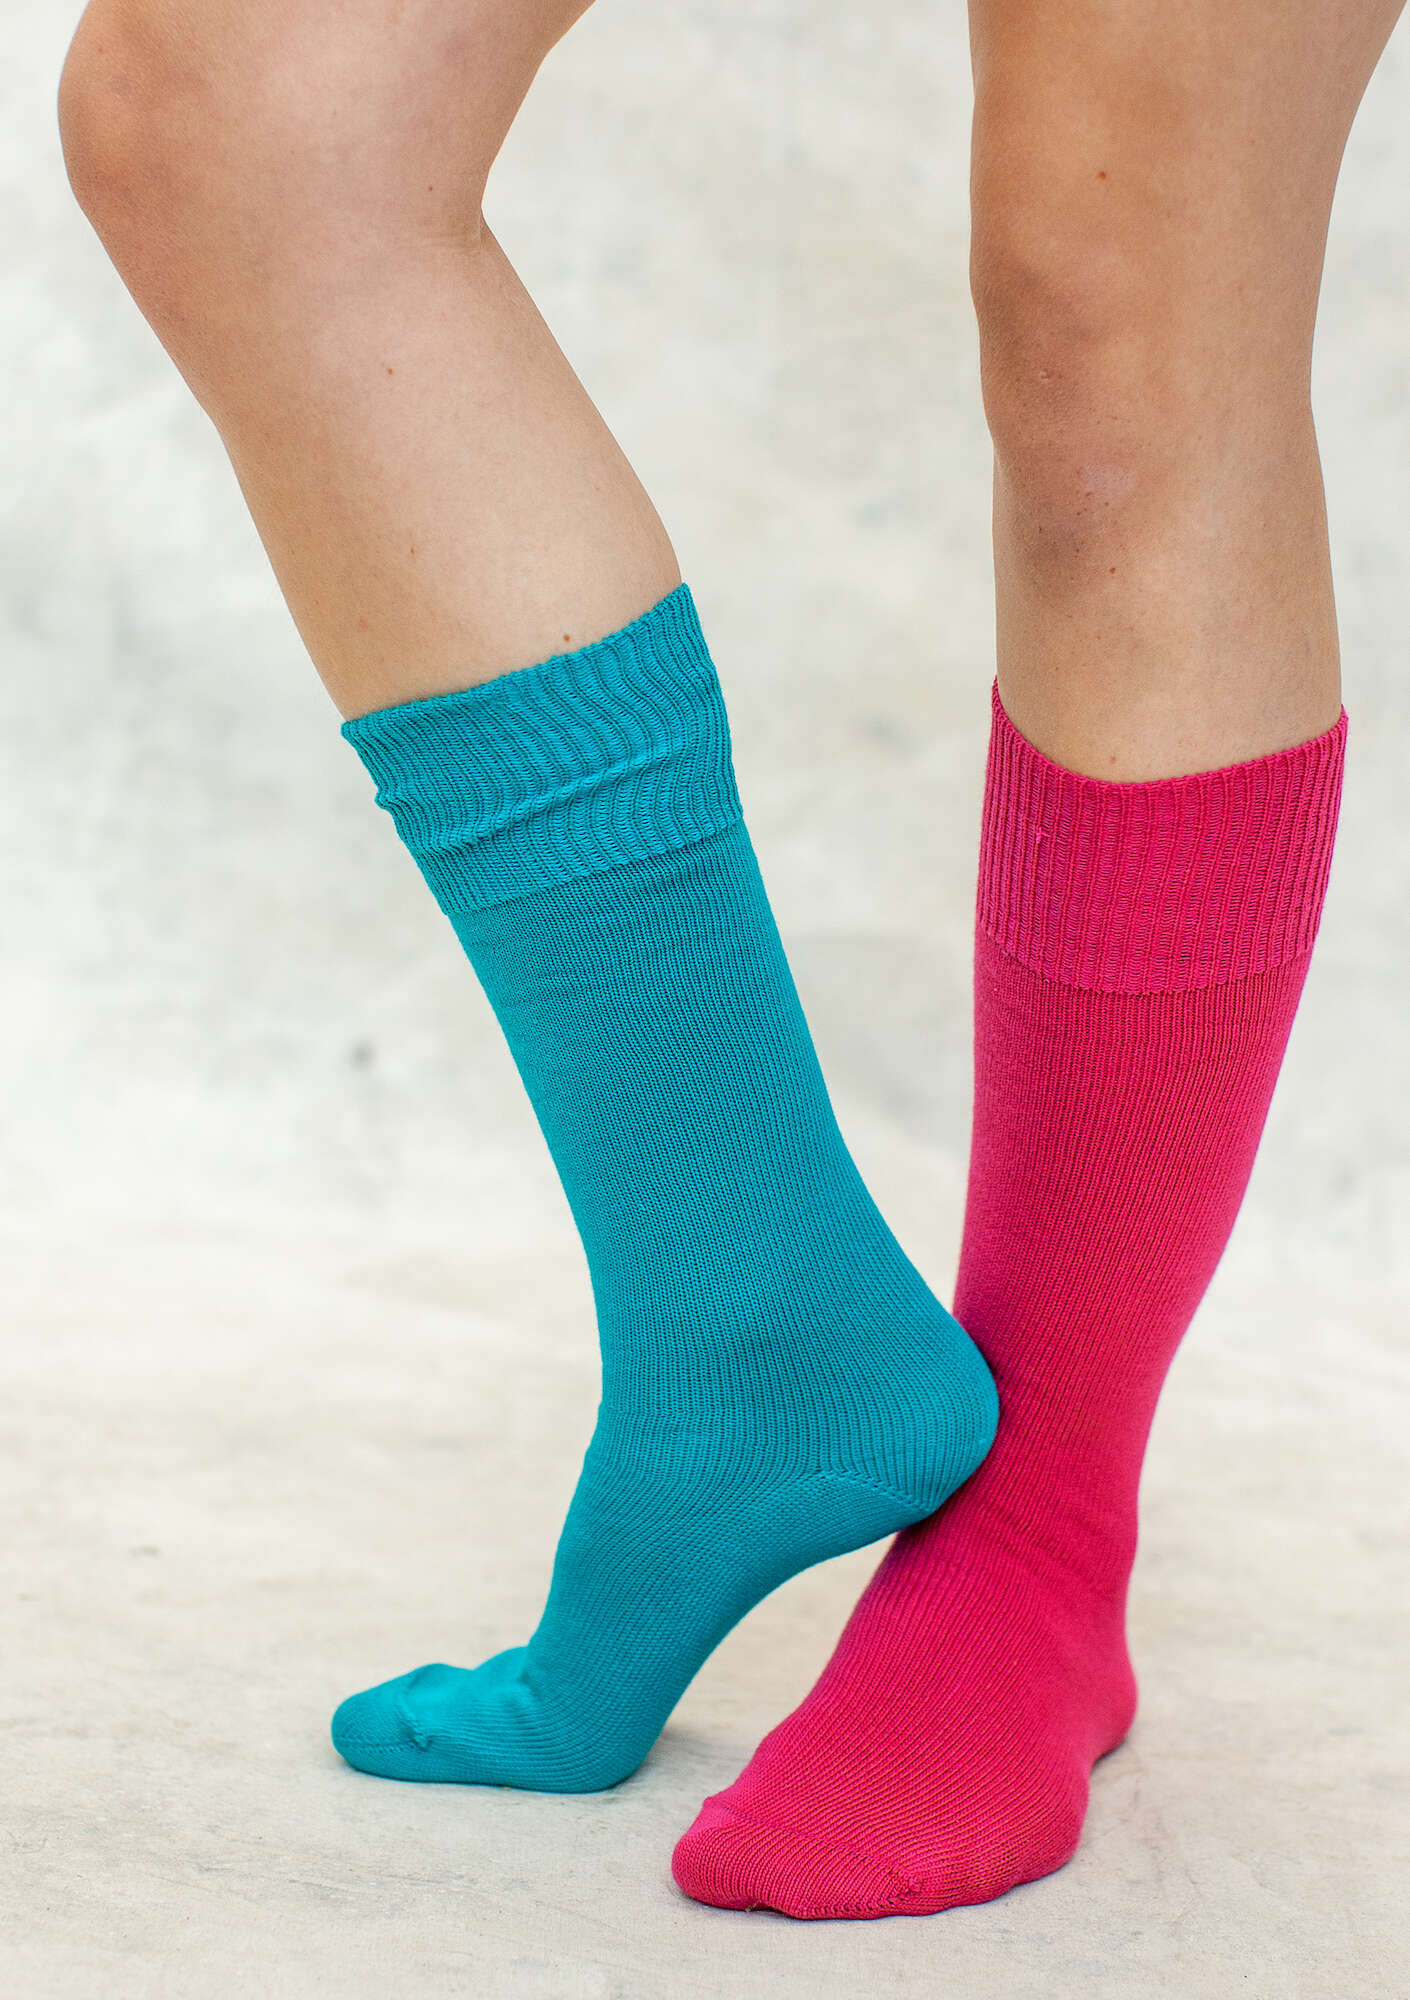 Solid-colored knee-highs in organic cotton turquoise